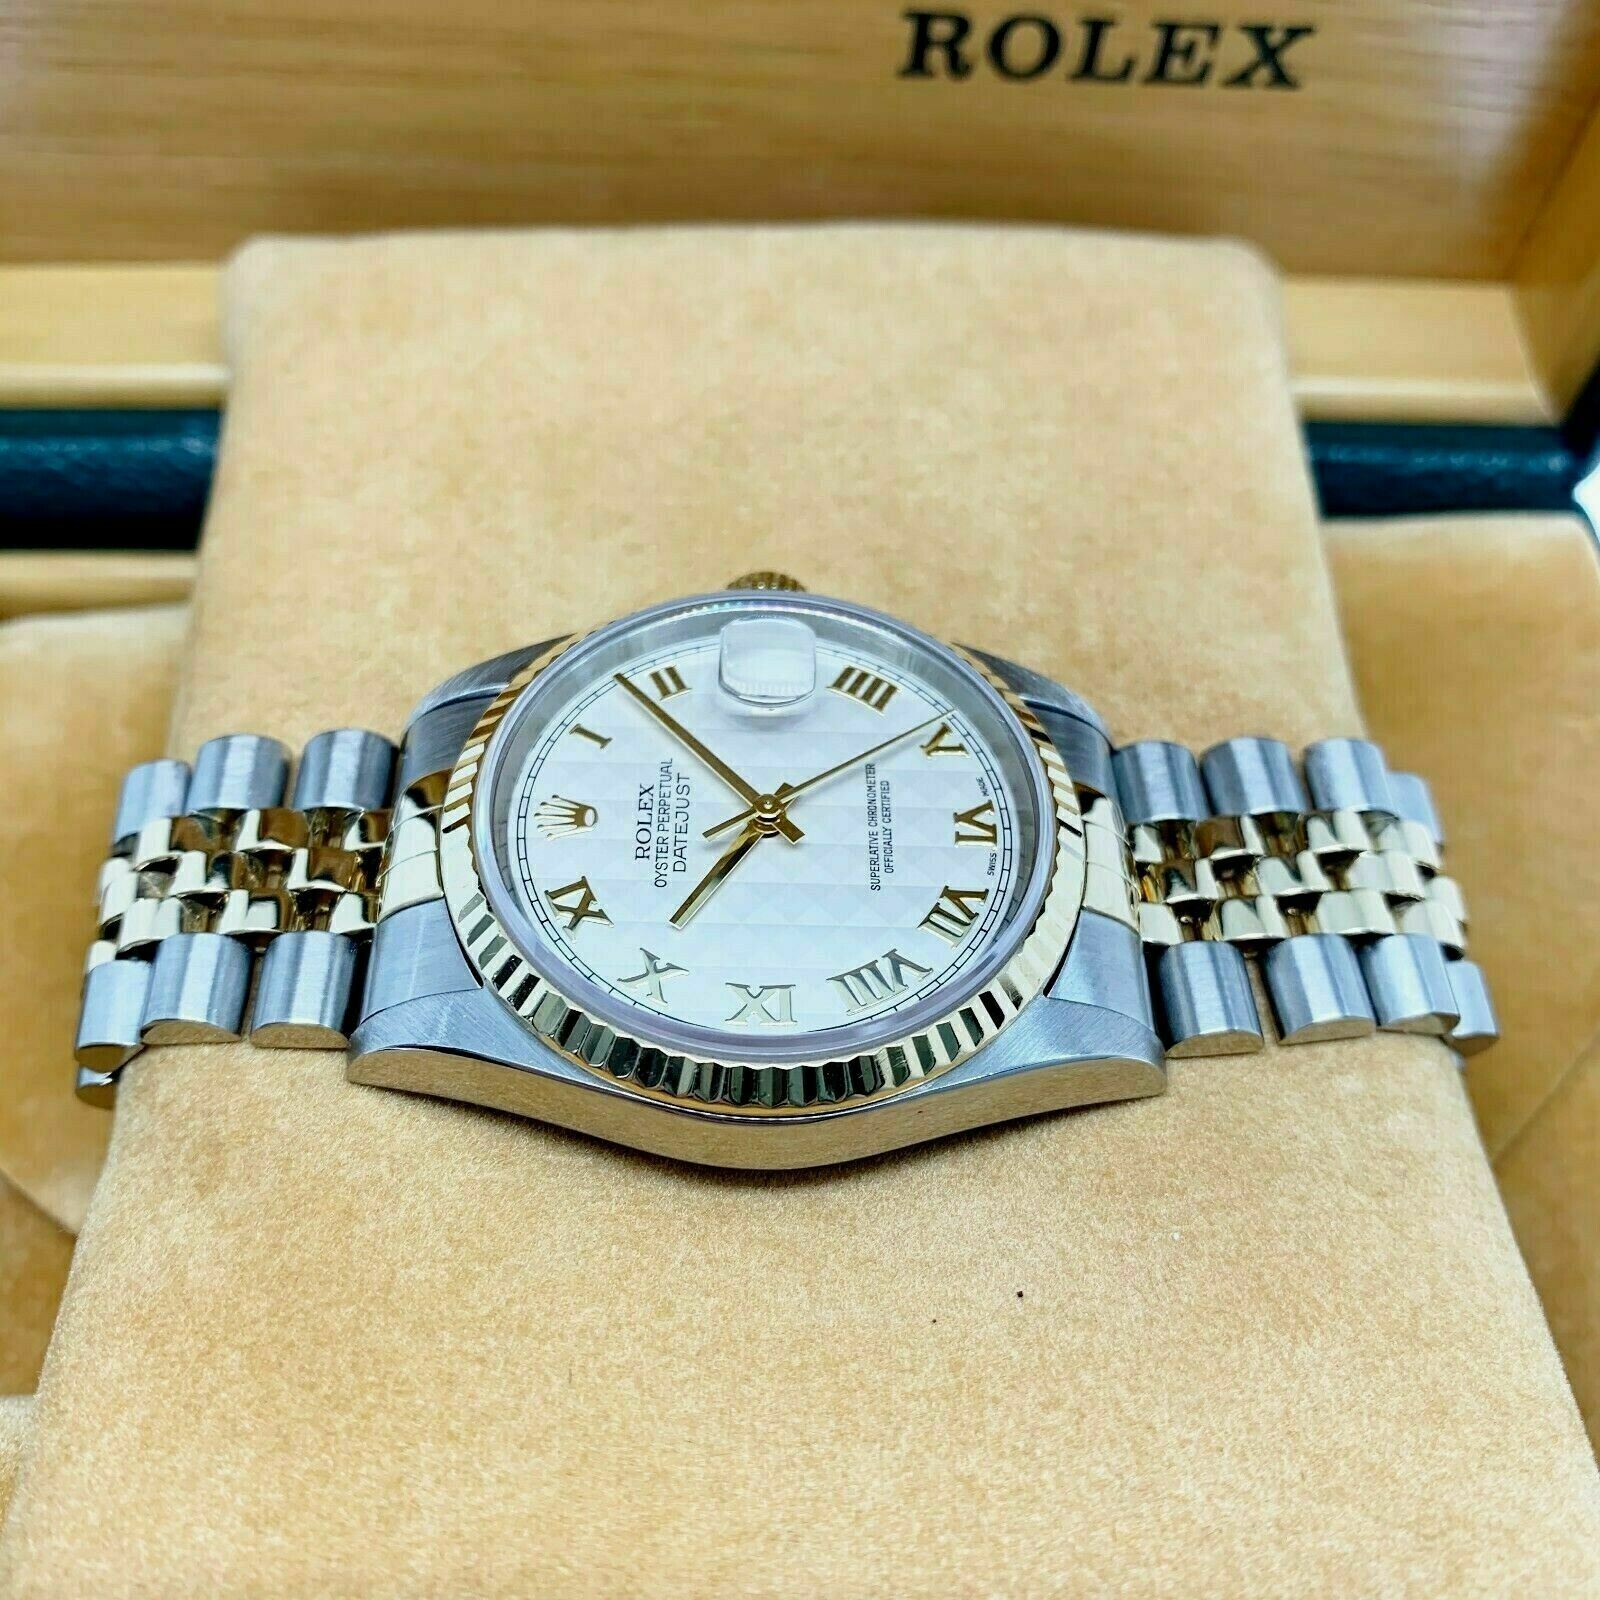 Rolex 36MM Datejust Watch 18K Yellow Gold Stainless Steel Ref 16233 Box & Papers